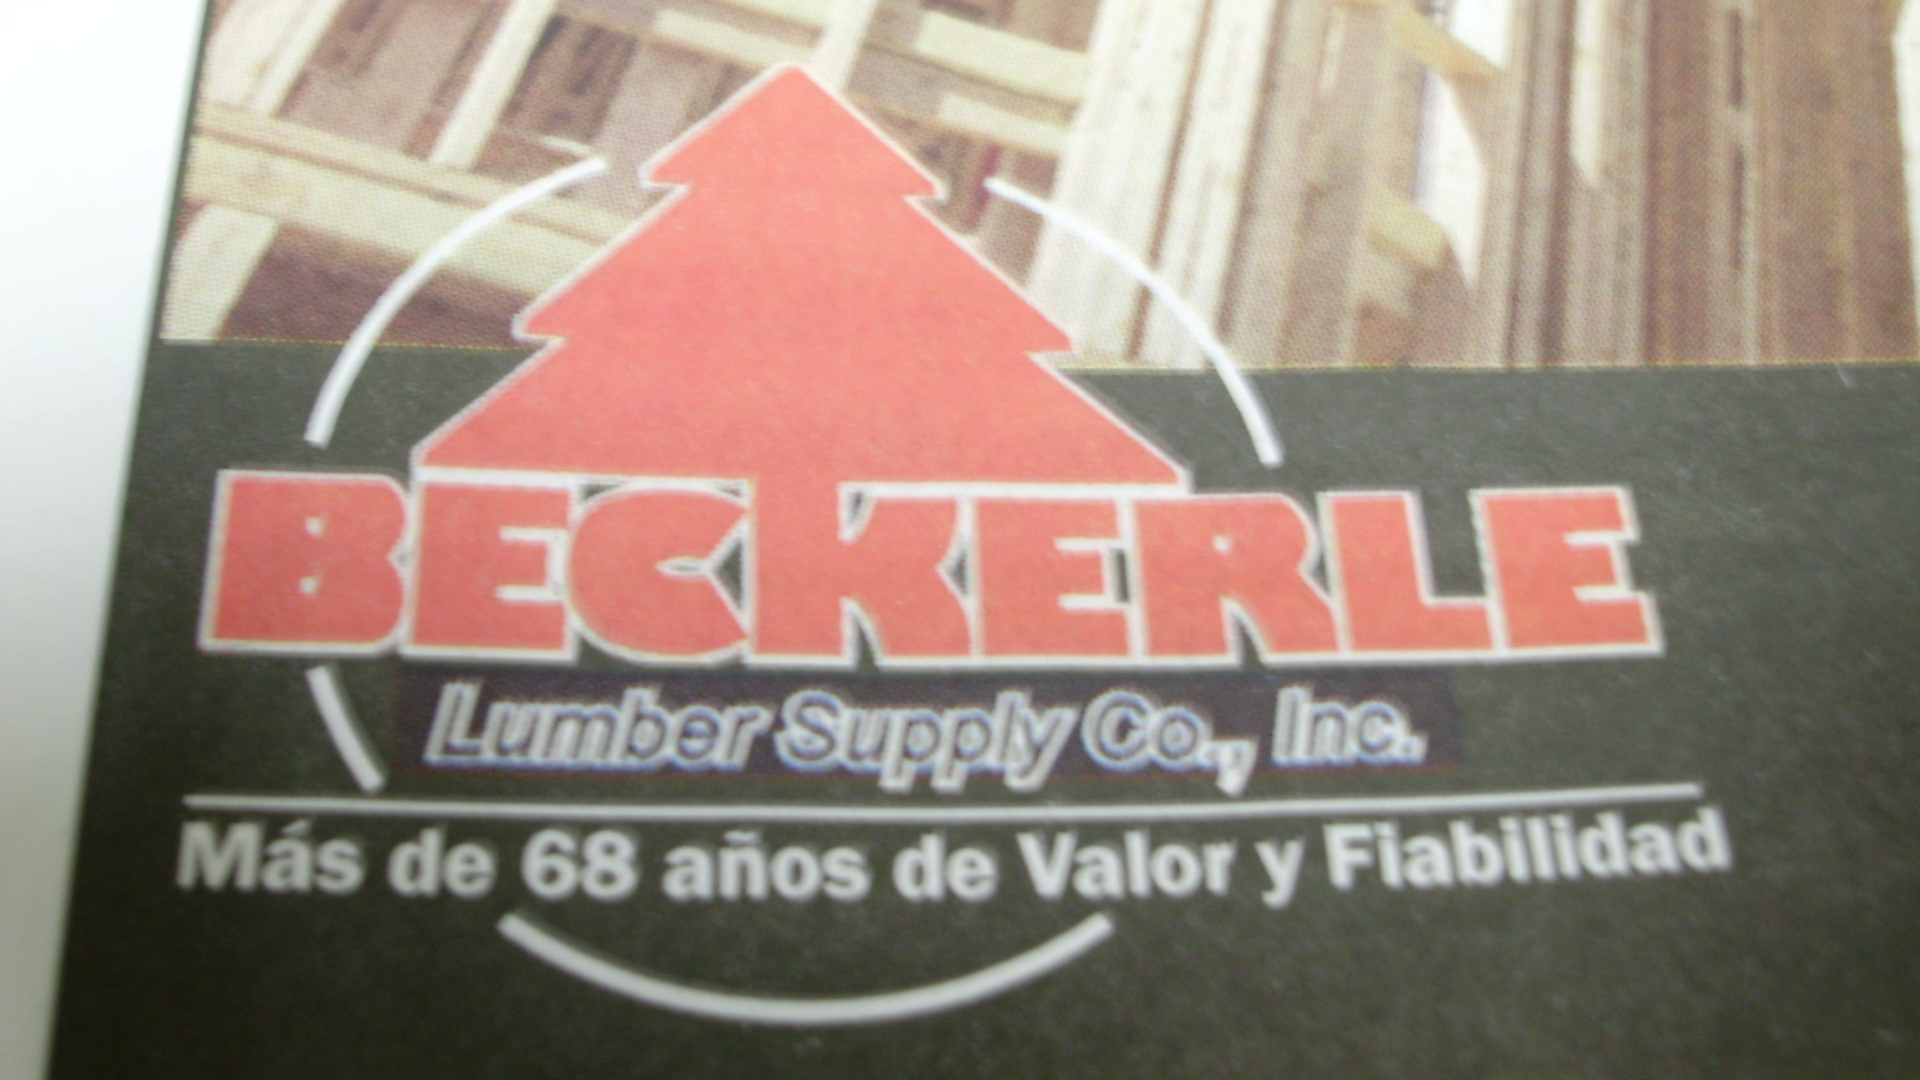 Most Complete Paint Line in Rockland County. Beckerle Lumber is your Tienda!